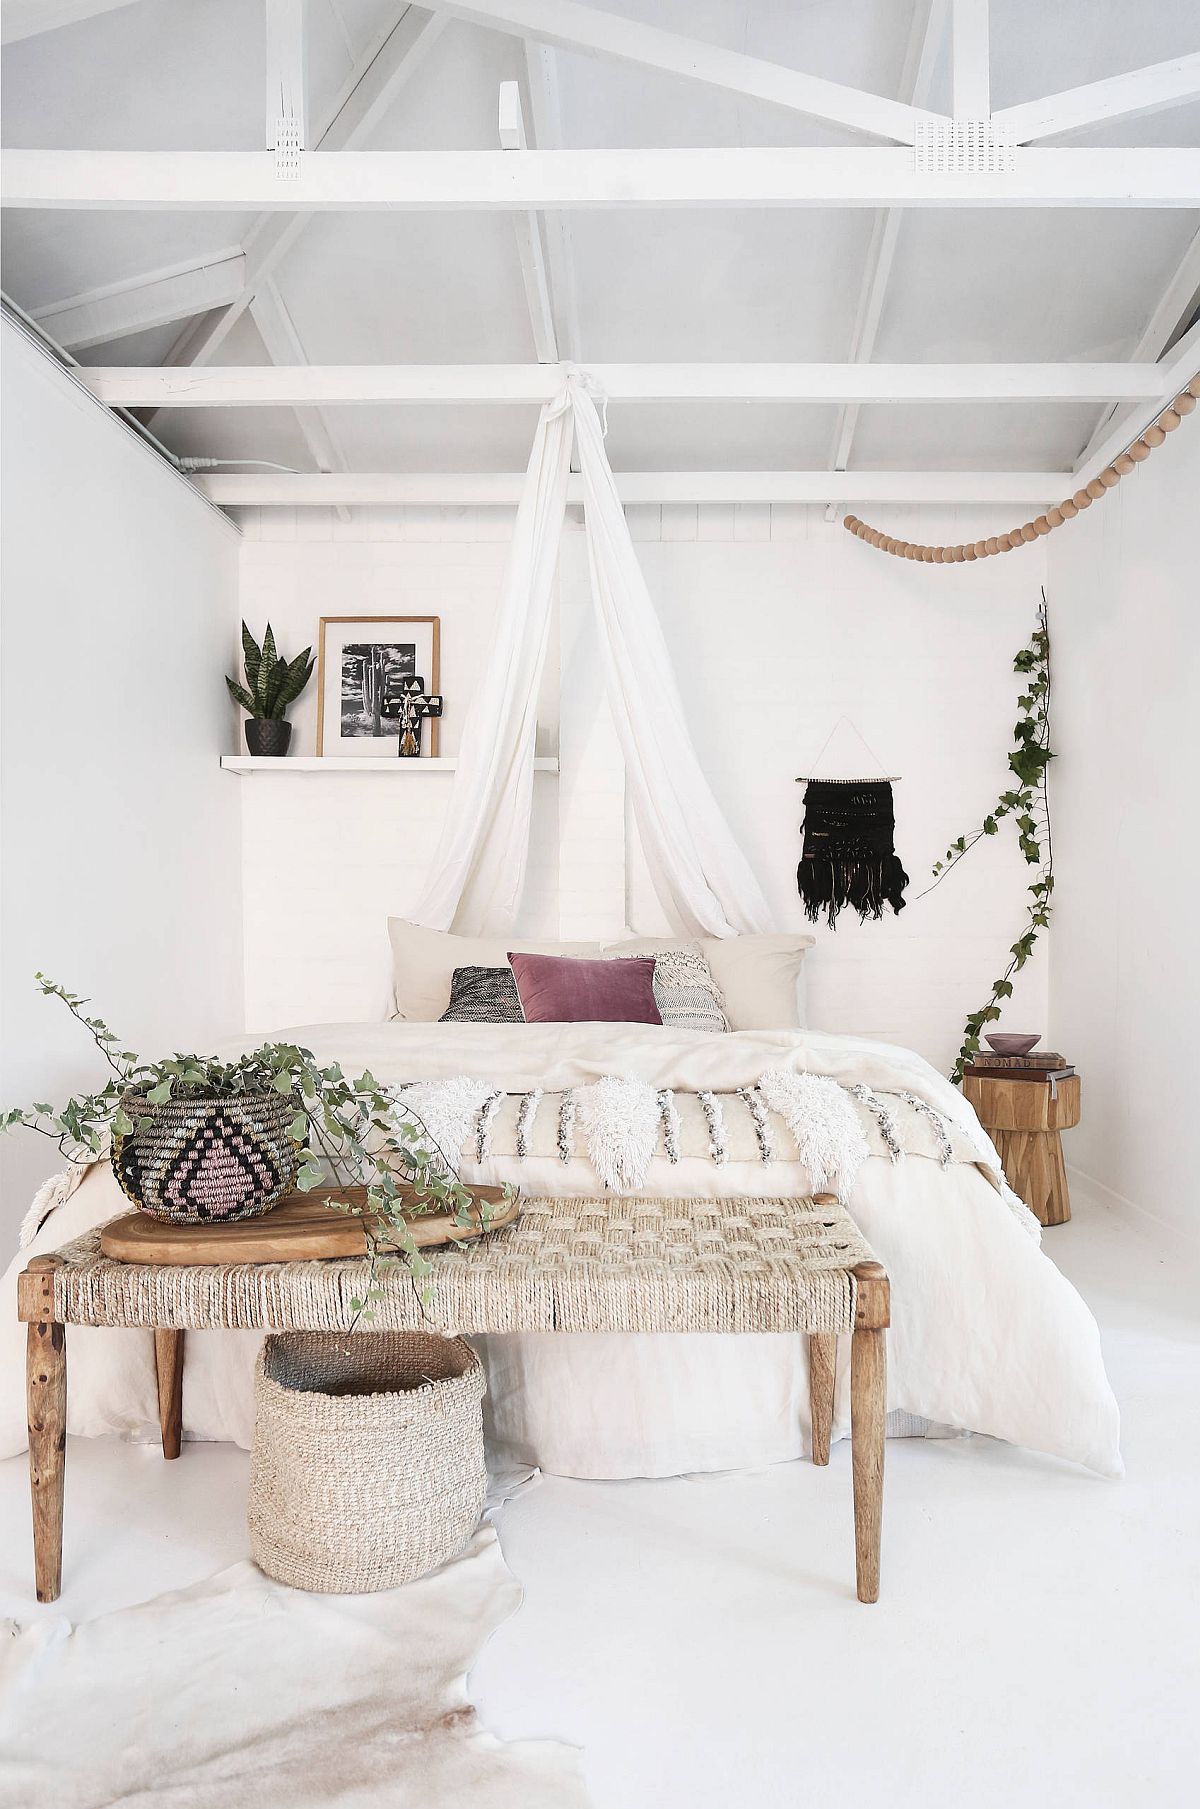 Bohemian-beach-style-bedroom-is-easy-on-the-eyes-and-senses-49465